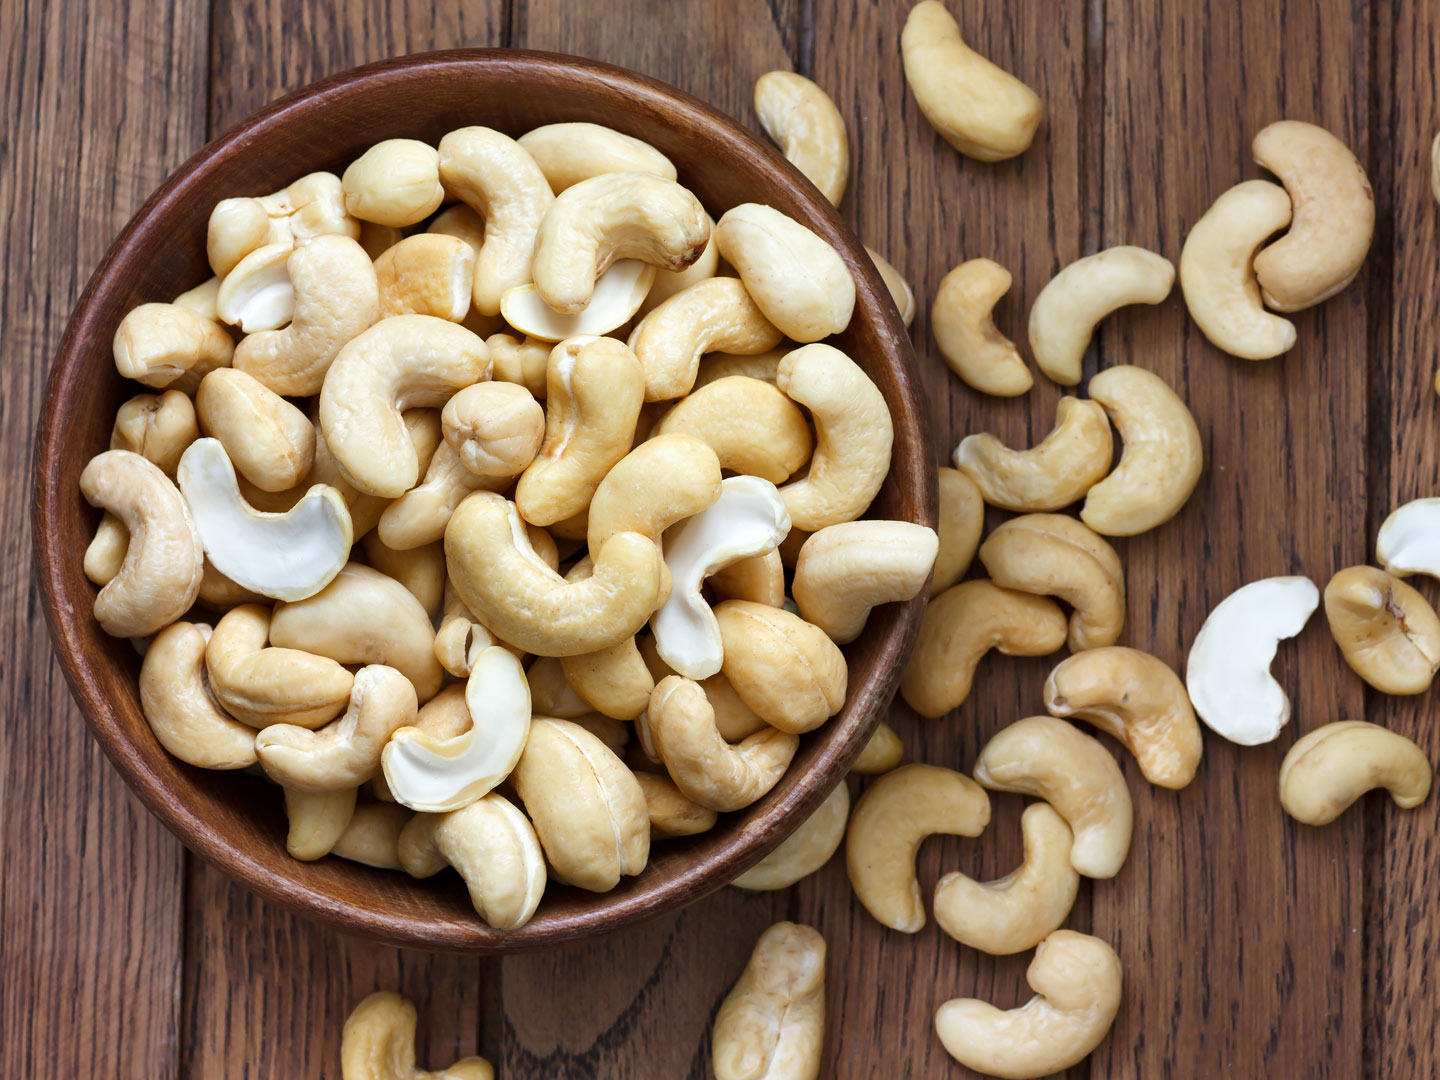 blog_health-tips_3-Reasons-Cashews-Are-One-Of-Dr.-Weil’s-Favorite-Foods_470795758